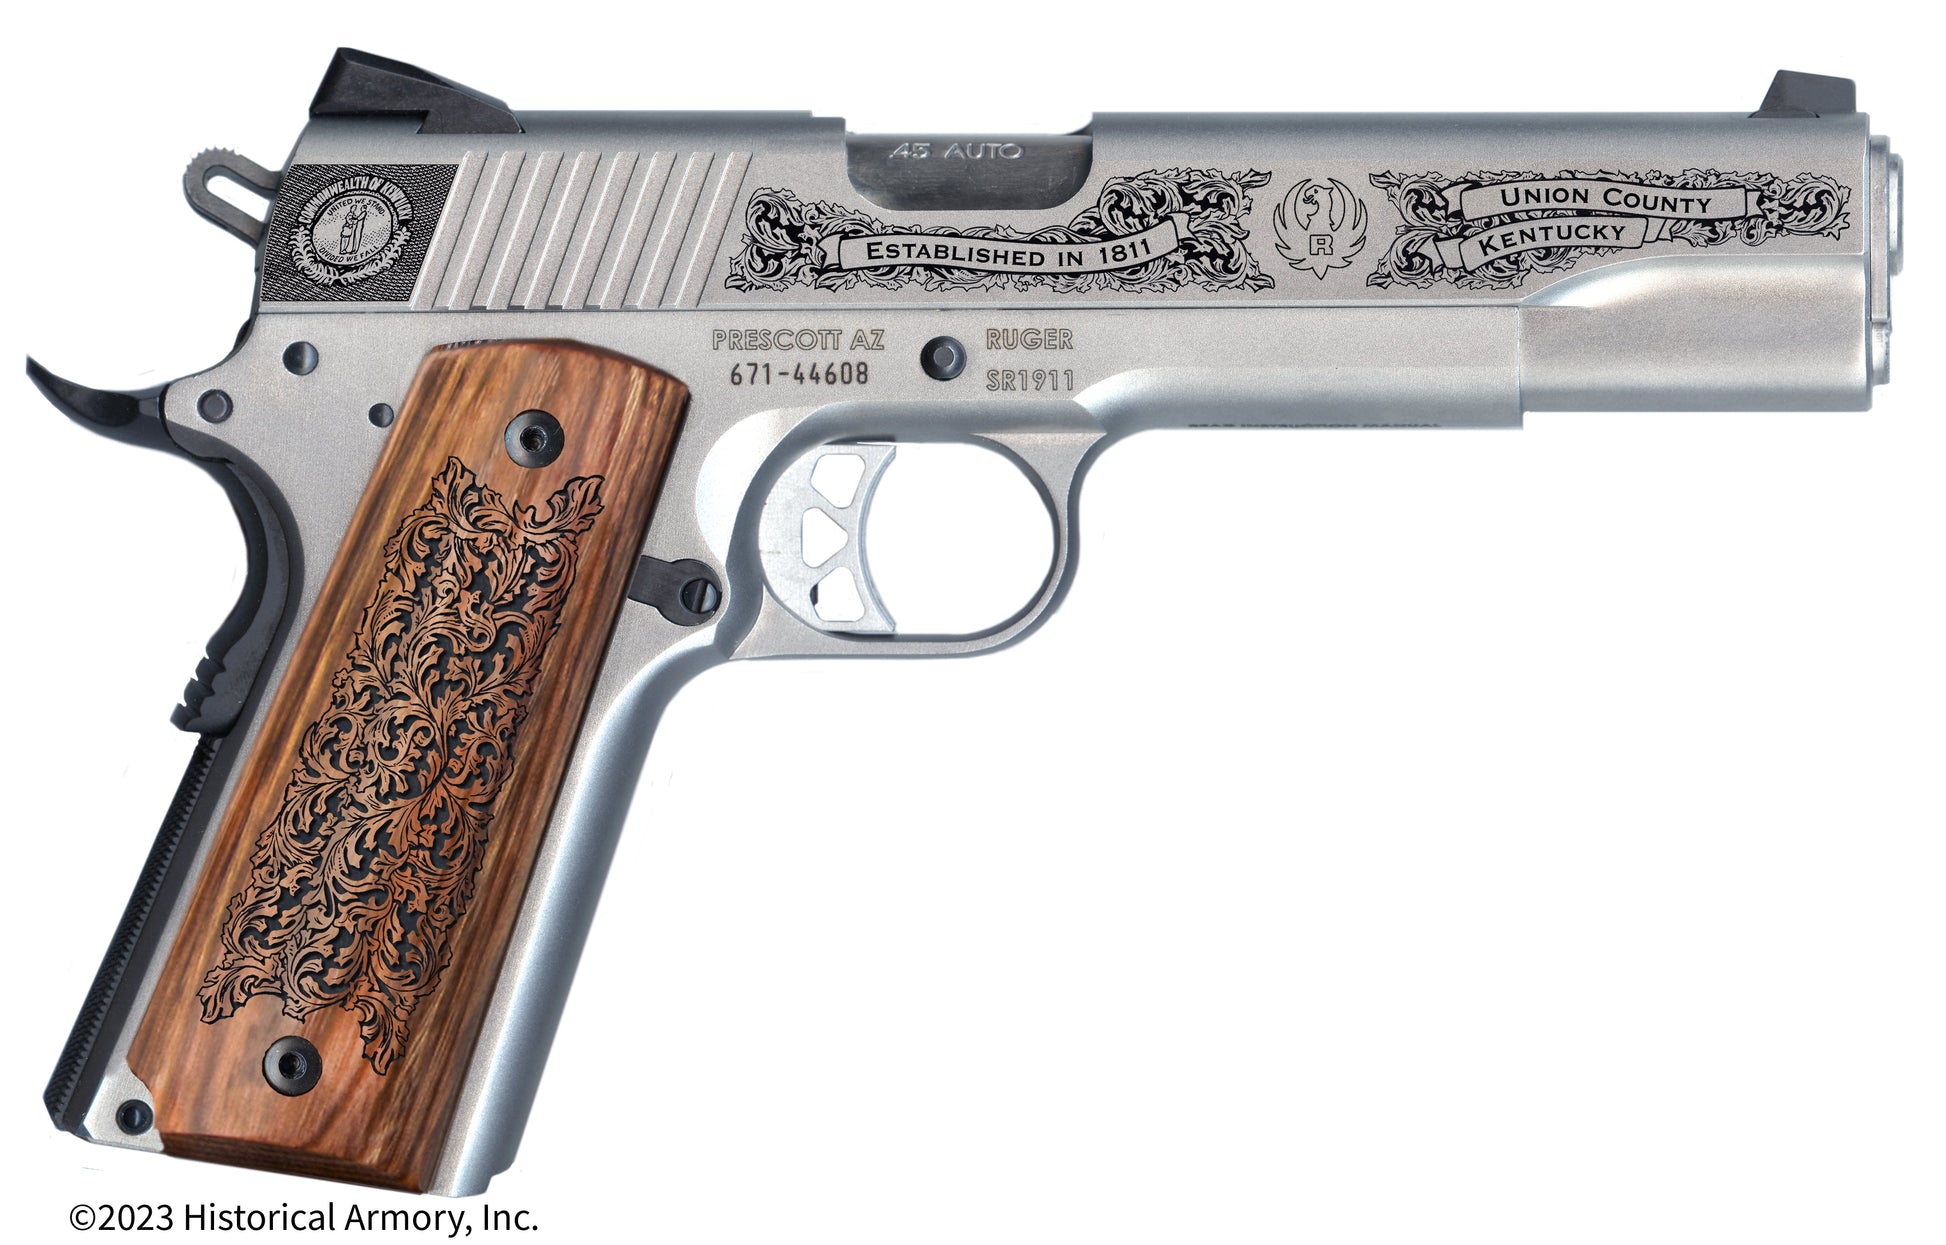 Union County Kentucky Engraved .45 Auto Ruger 1911